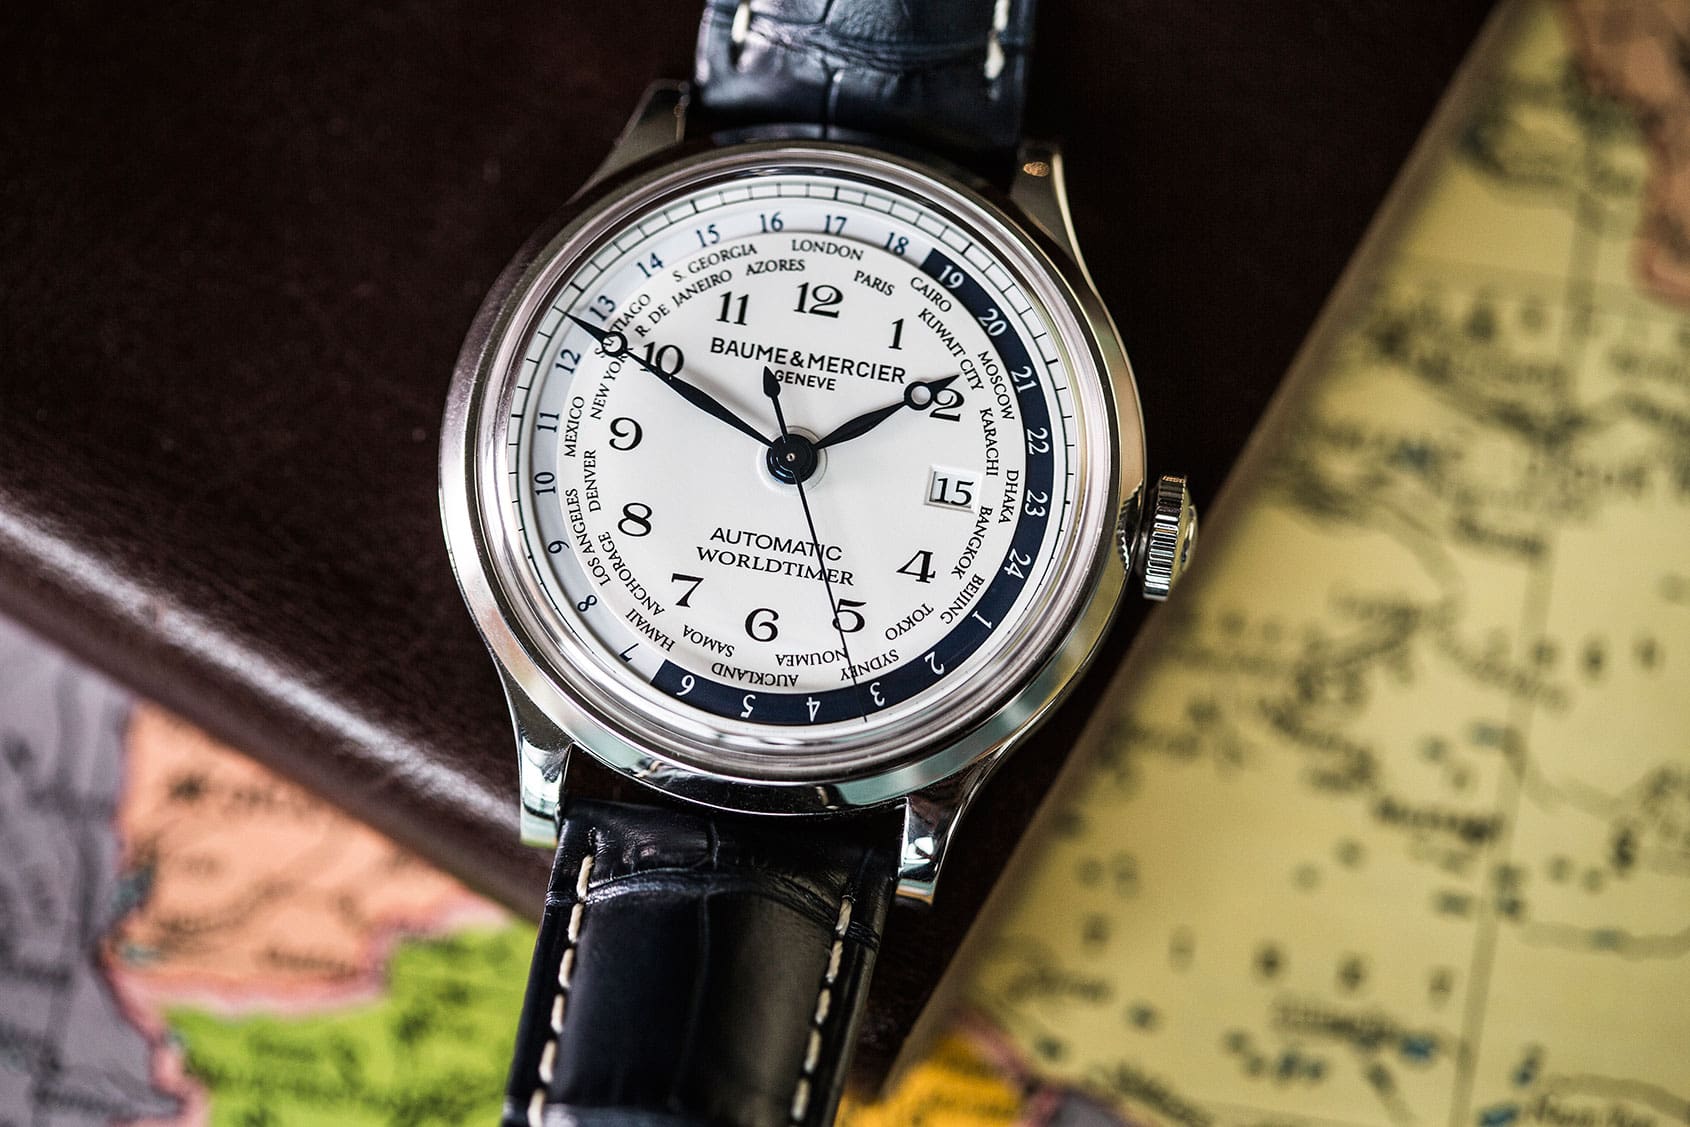 HANDS-ON: The romance of travel and the Baume & Mercier Capeland Worldtimer